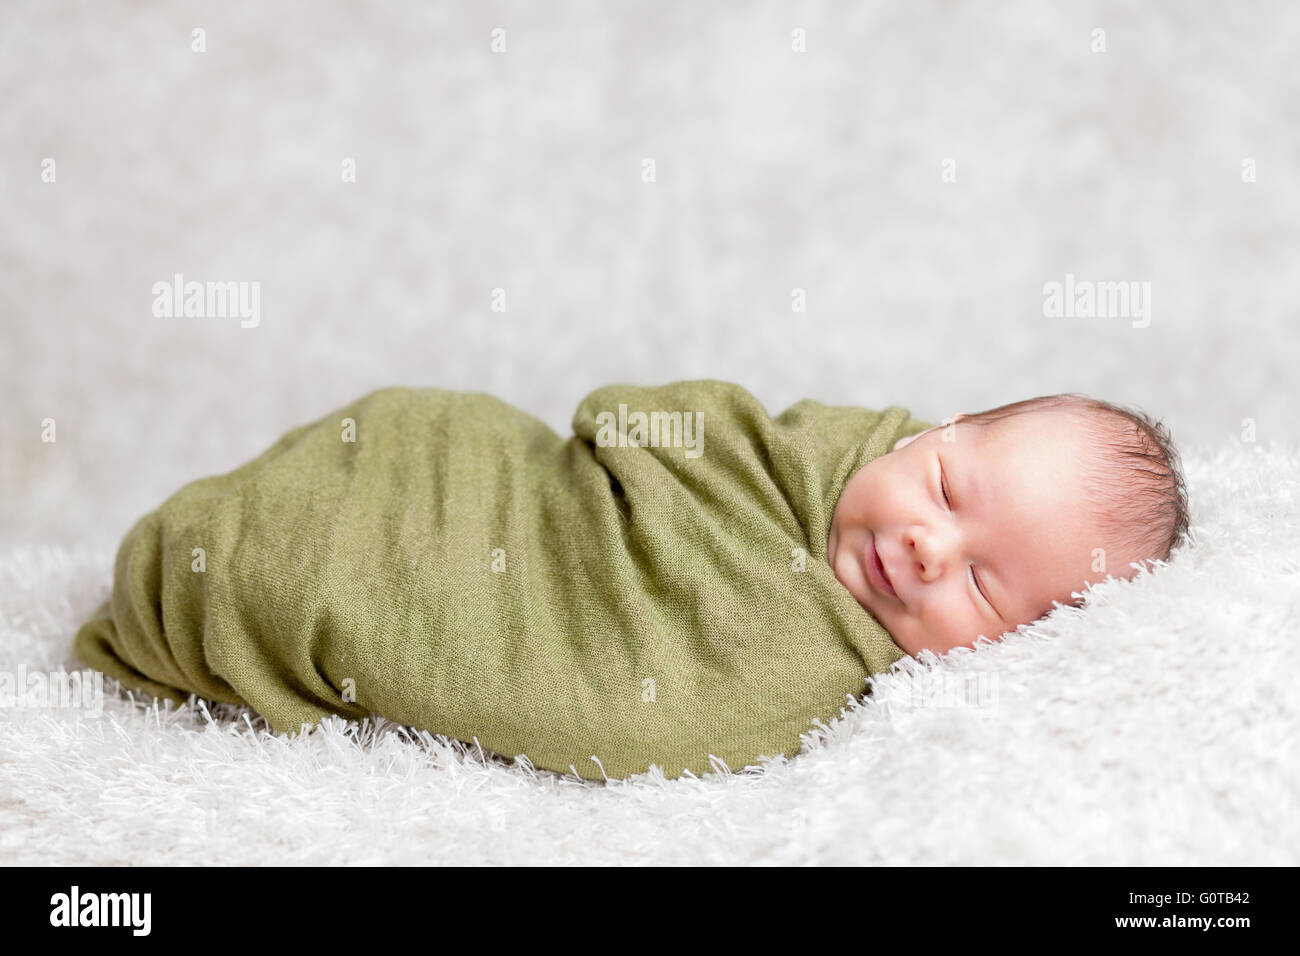 Beautiful newborn baby wrapped in a blanket Stock Photo